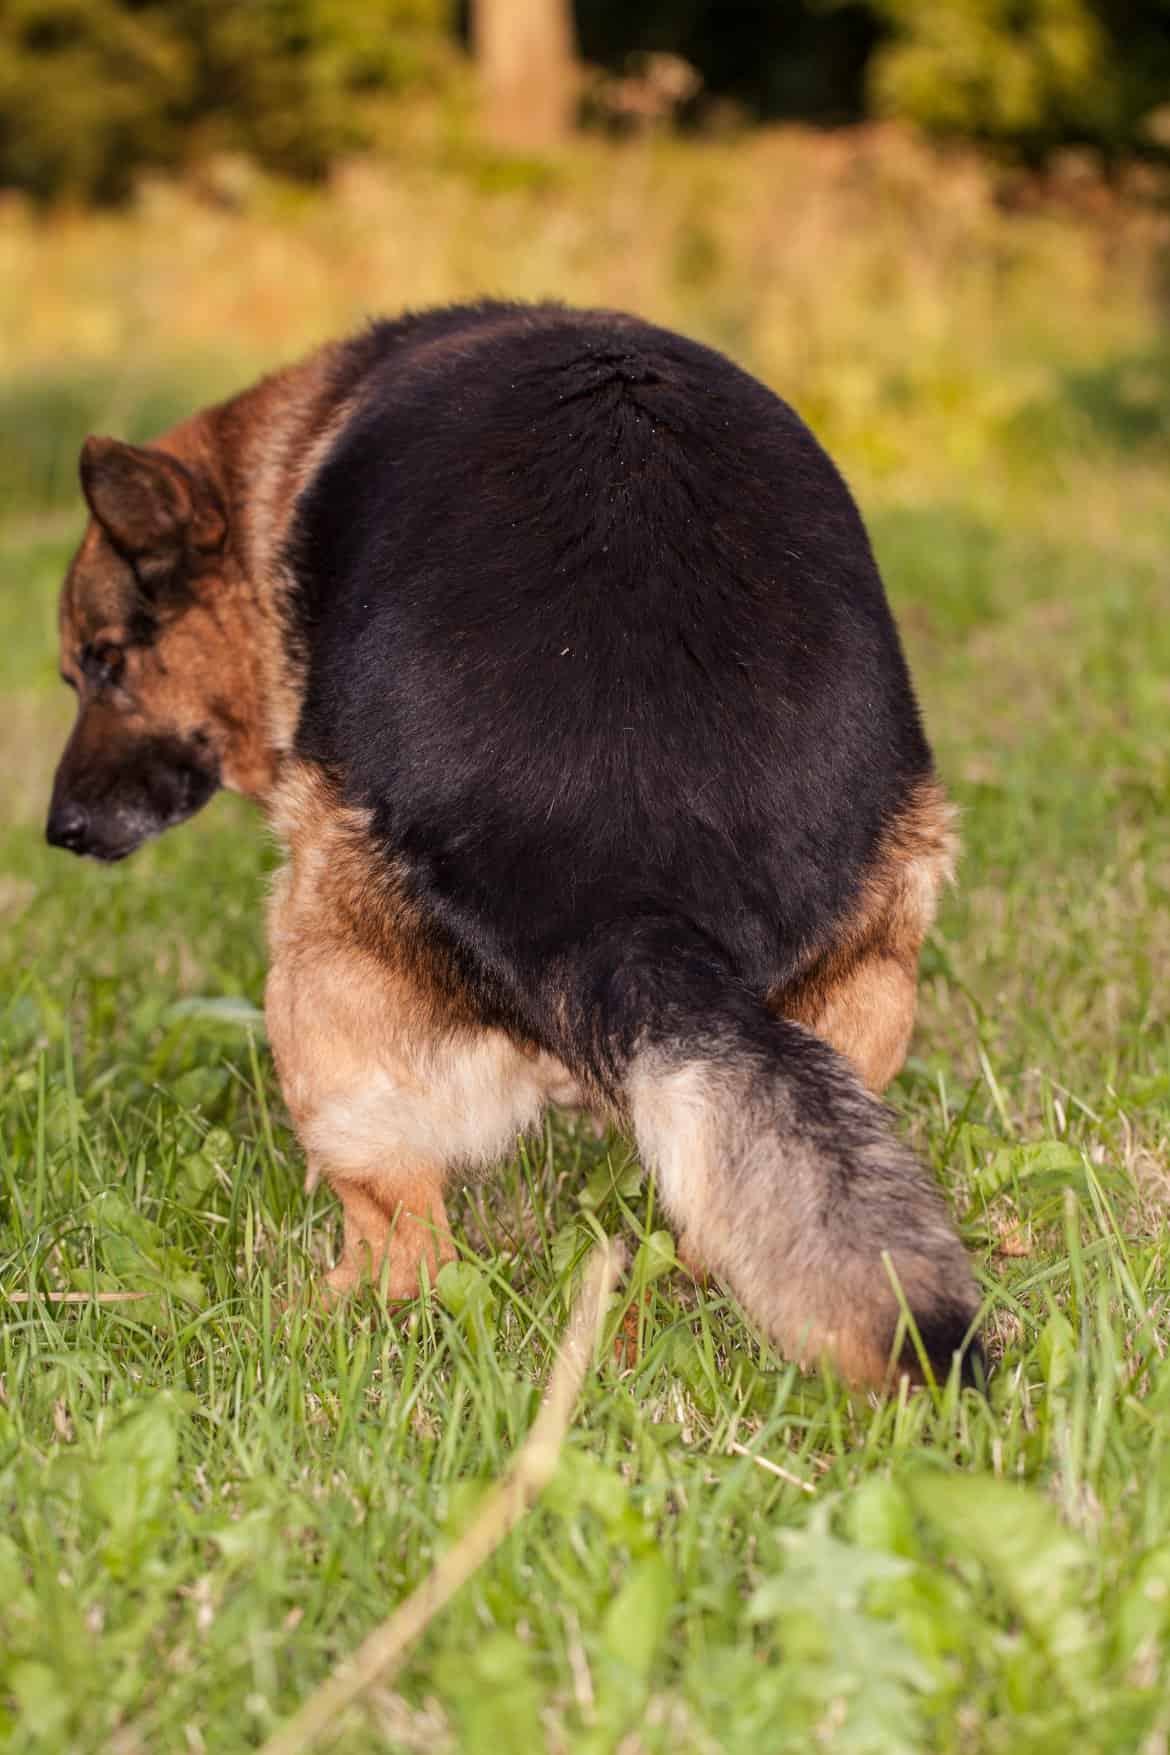 How long after eating does a dog poop?